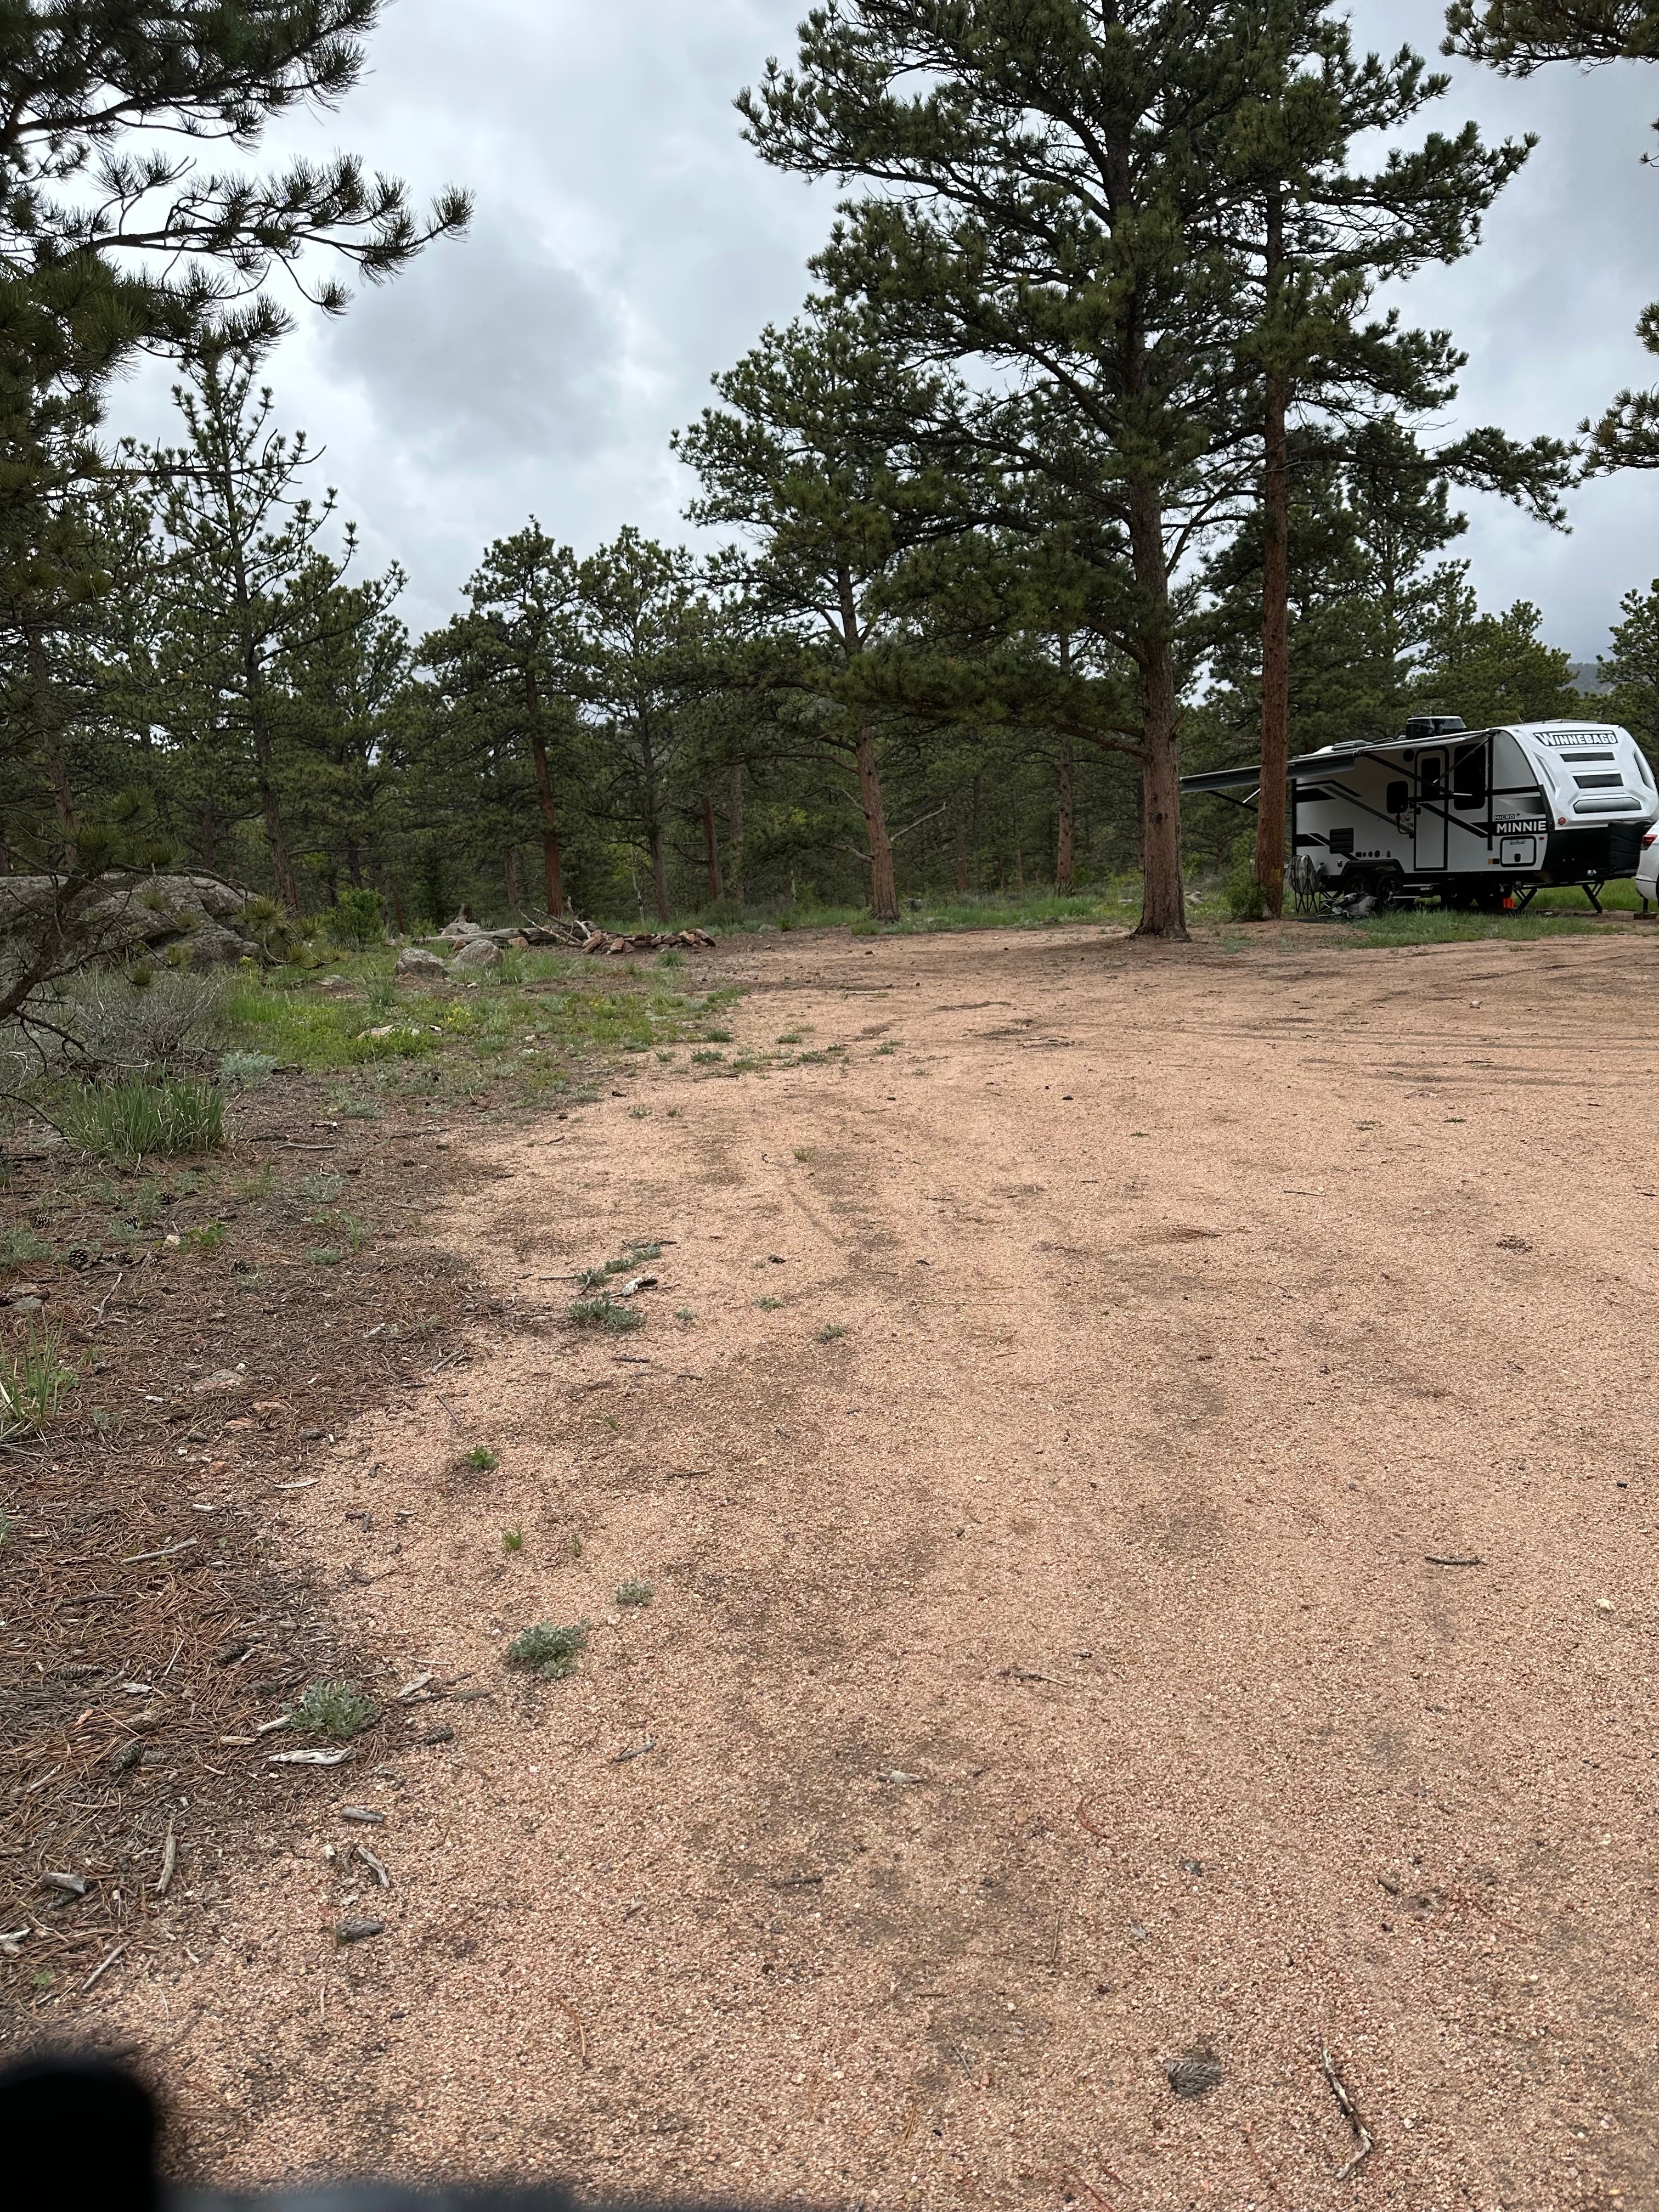 Camper submitted image from Elkhorn Creek Dispersed Camping - 5